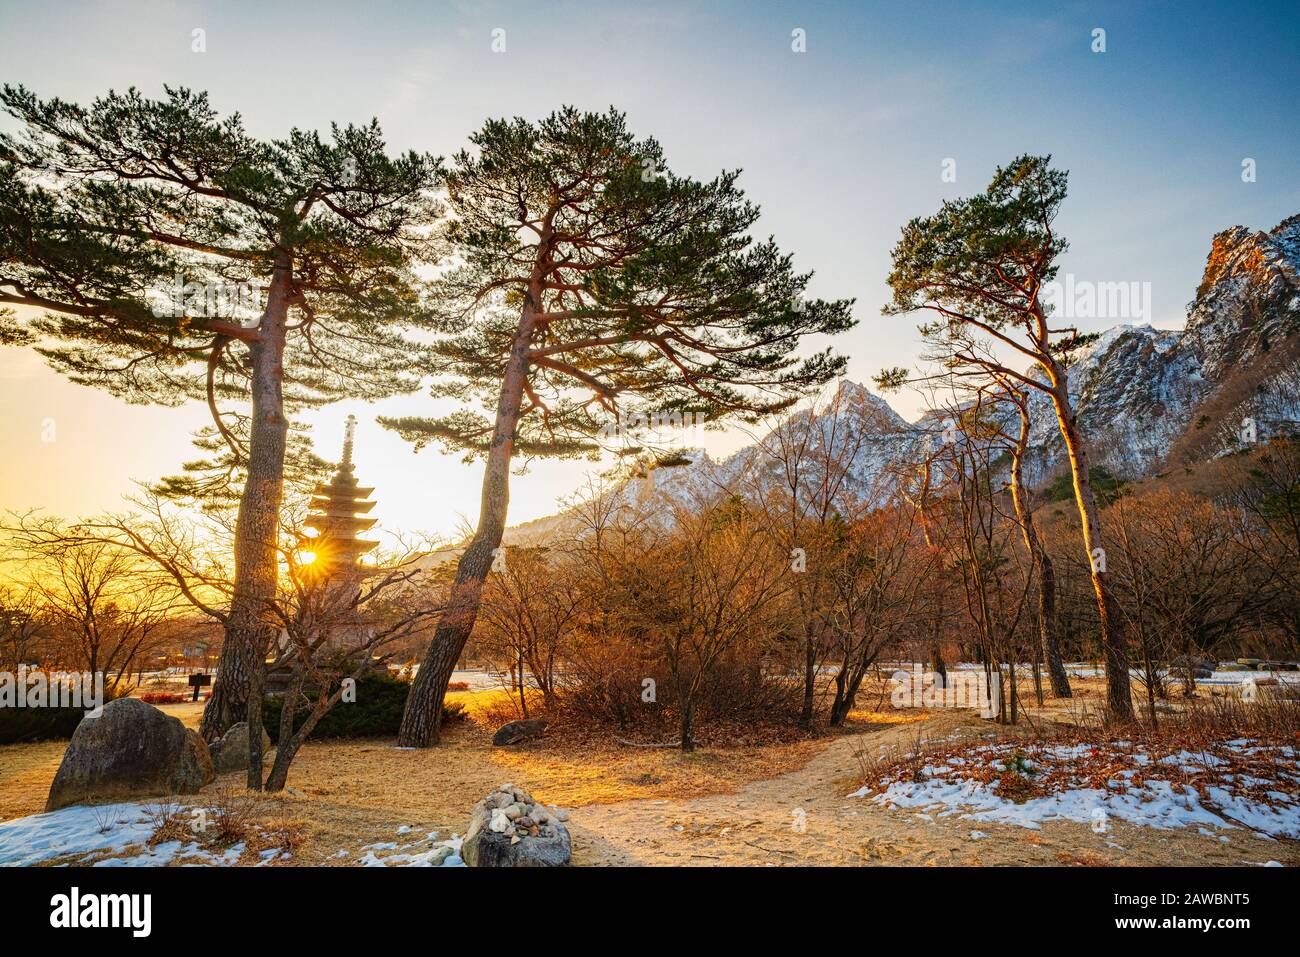 Winter lends a markedly different feel to the landmarks and cultural sights within Seoraksan National Park, South Korea. Stock Photo